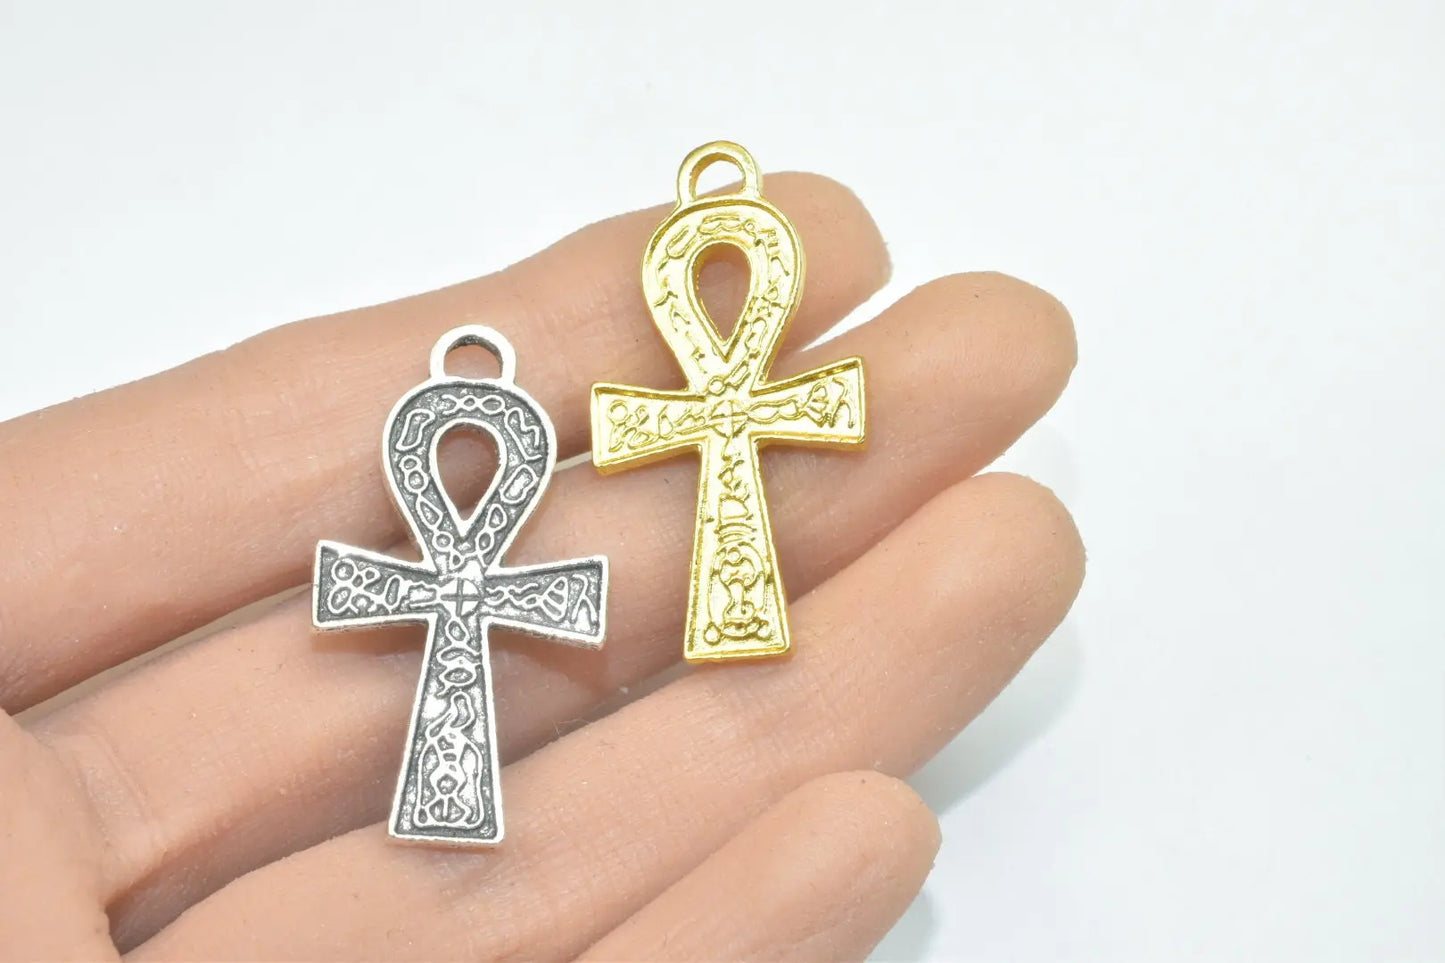 15PCs Egyptian Ankh Life Symbol Key Charm Size 36x20mm Silver or Gold Charm Egyptian Pendant For Jewelry Making - BeadsFindingDepot